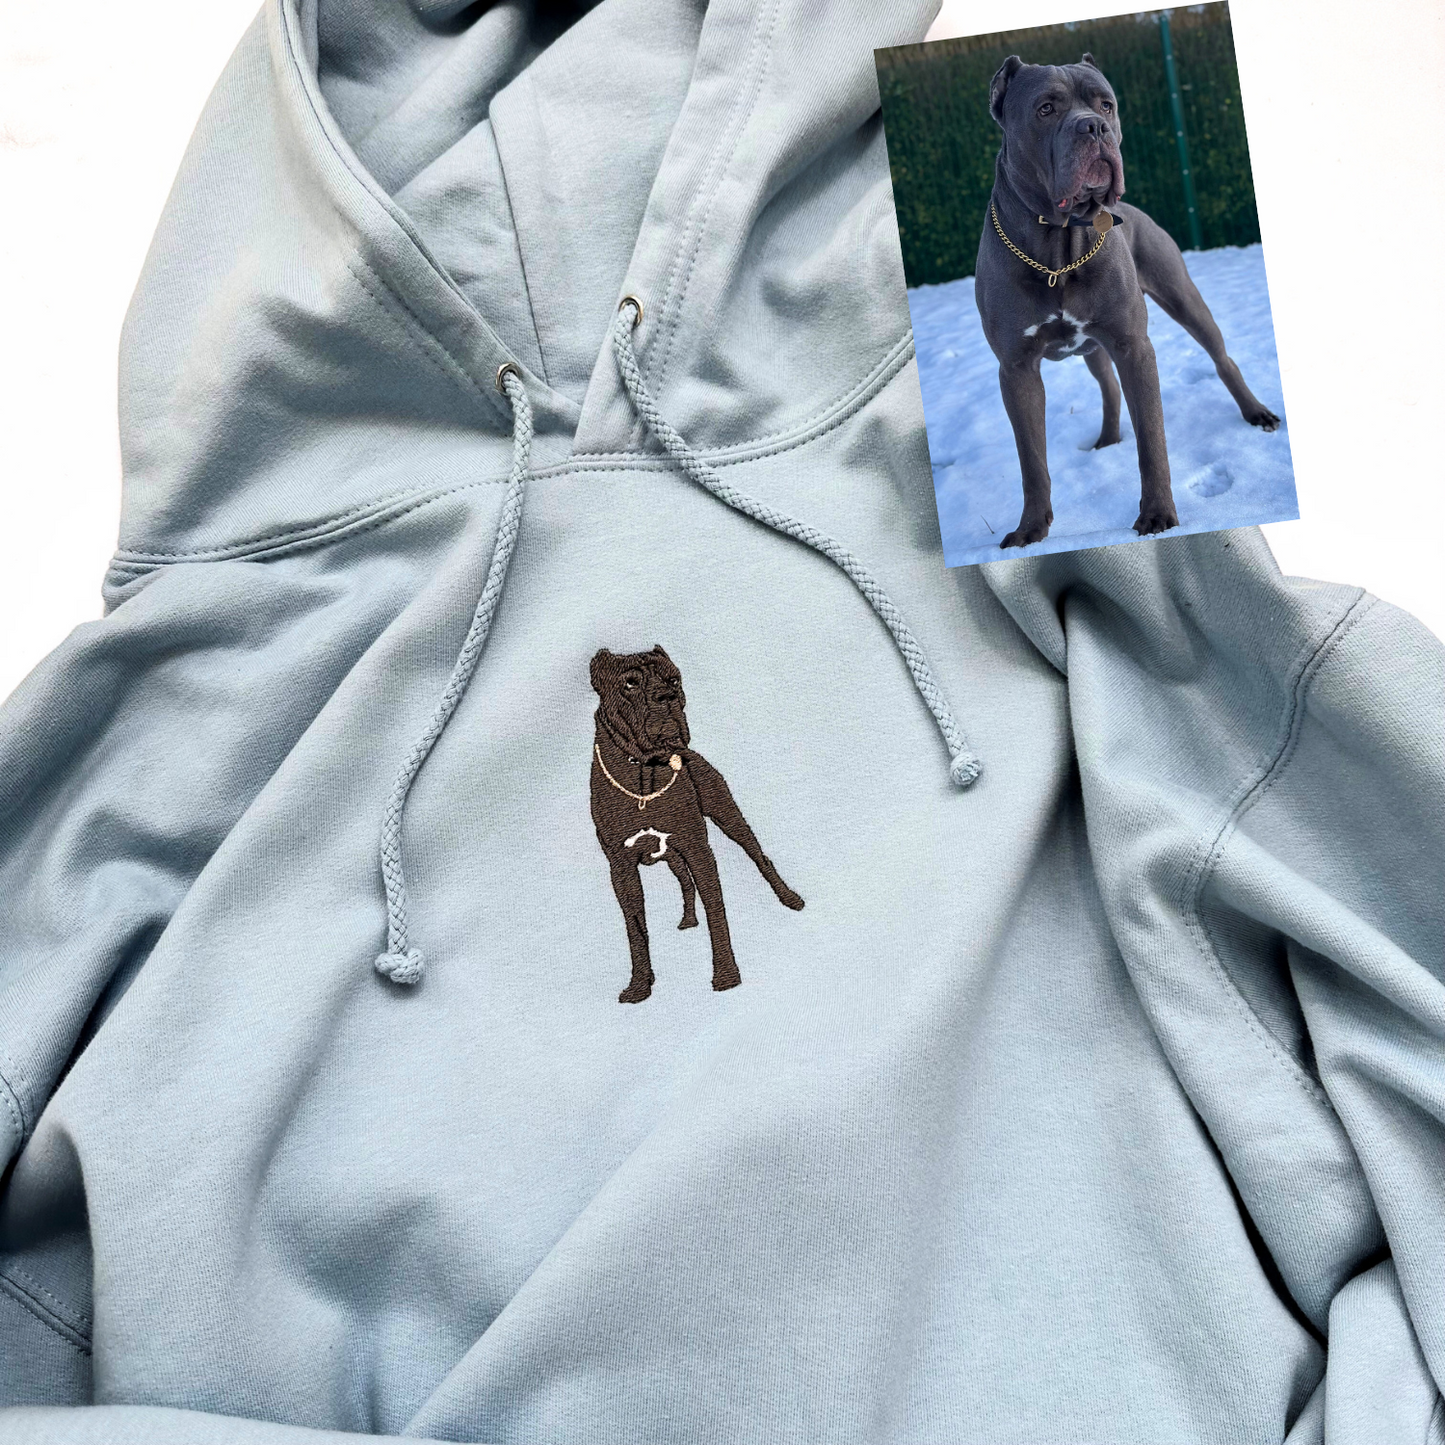 Get your little one cozy and stylish with our personalized pet hoodie! Simply upload a picture of your furry friend and we'll transform it into a beautiful embroidery on the front of the hoodie. Your child will love showing off their beloved pet, and the soft, warm fabric will keep them comfortable all day long.